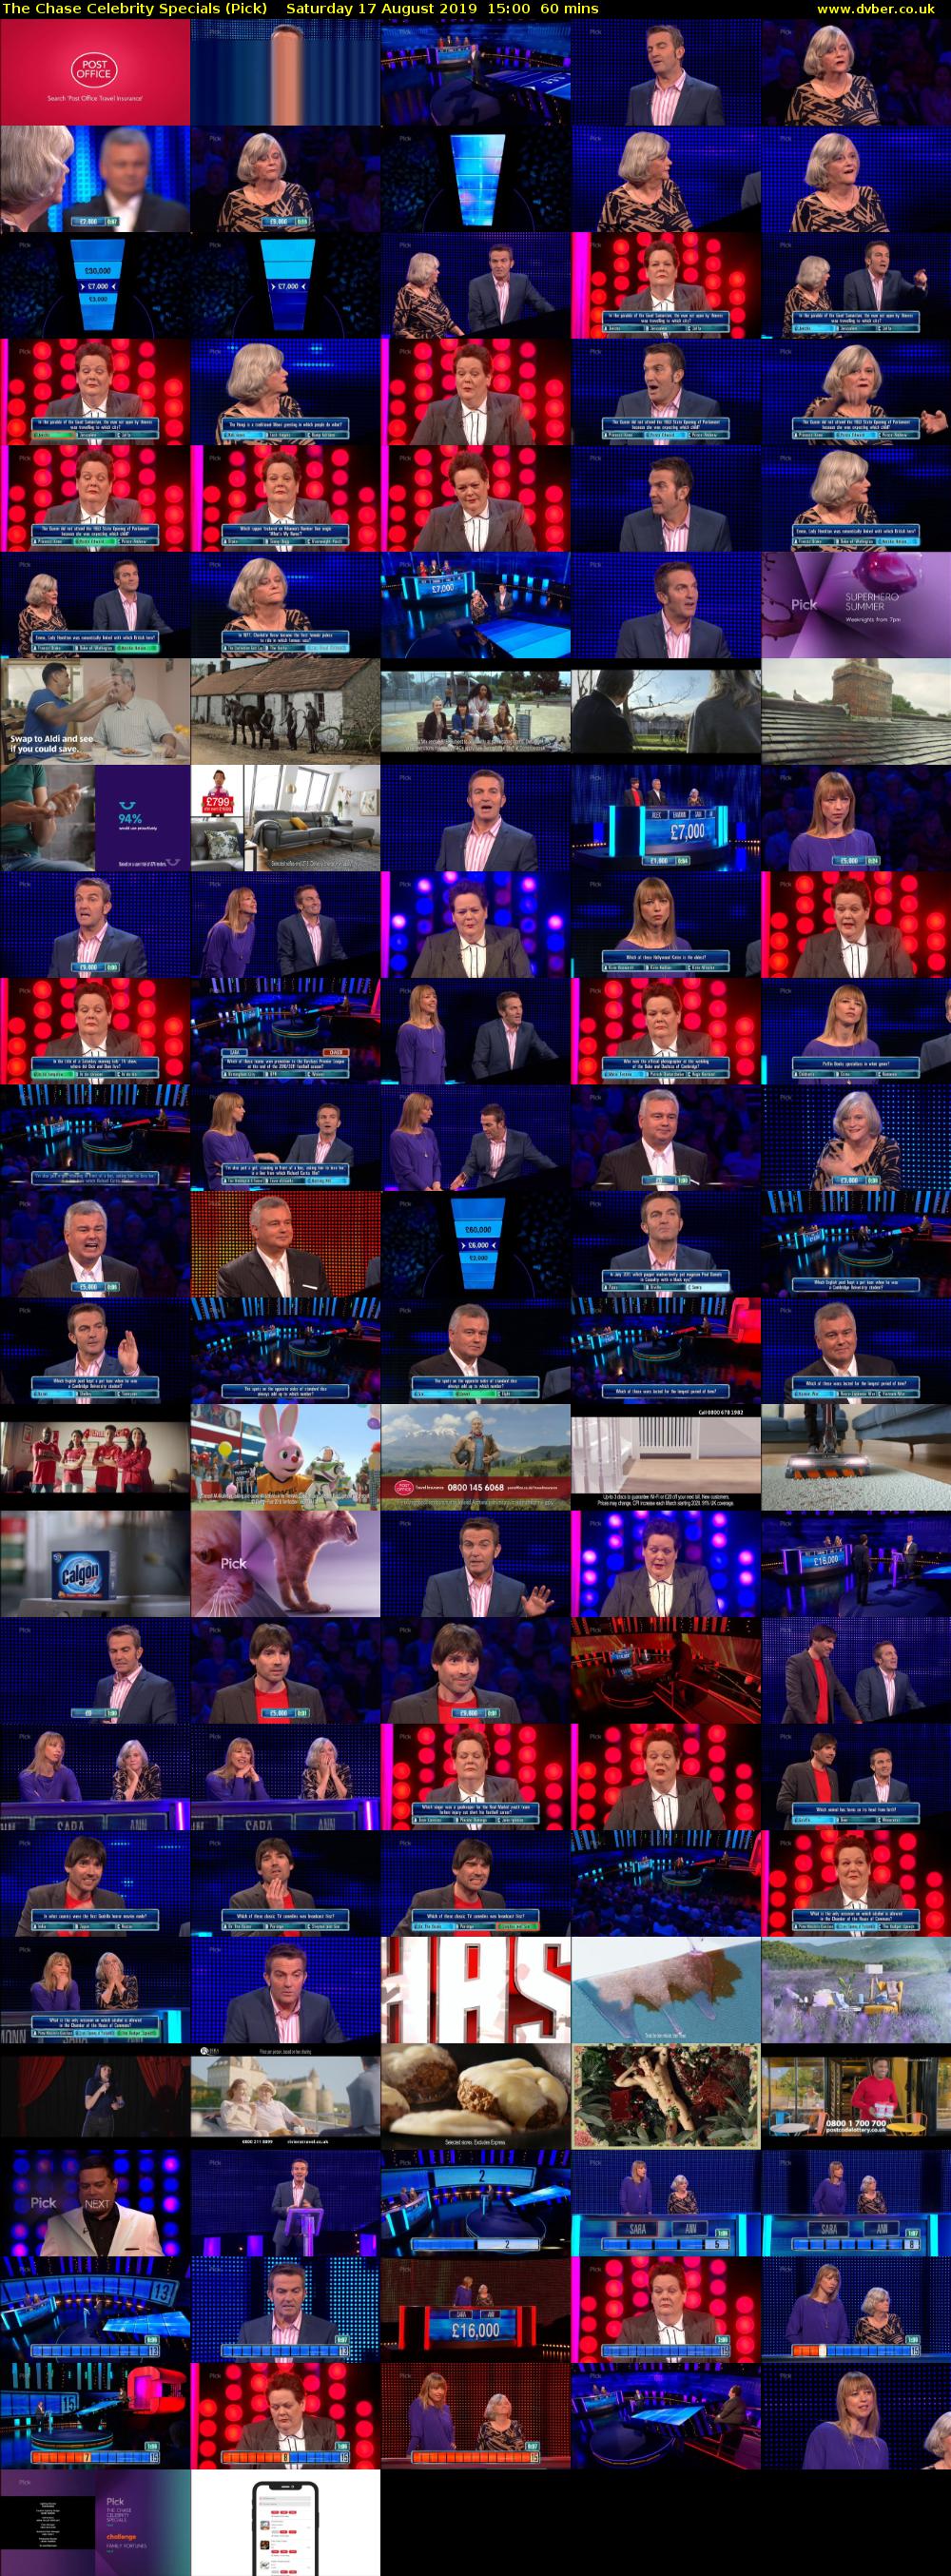 The Chase Celebrity Specials (Pick) Saturday 17 August 2019 15:00 - 16:00